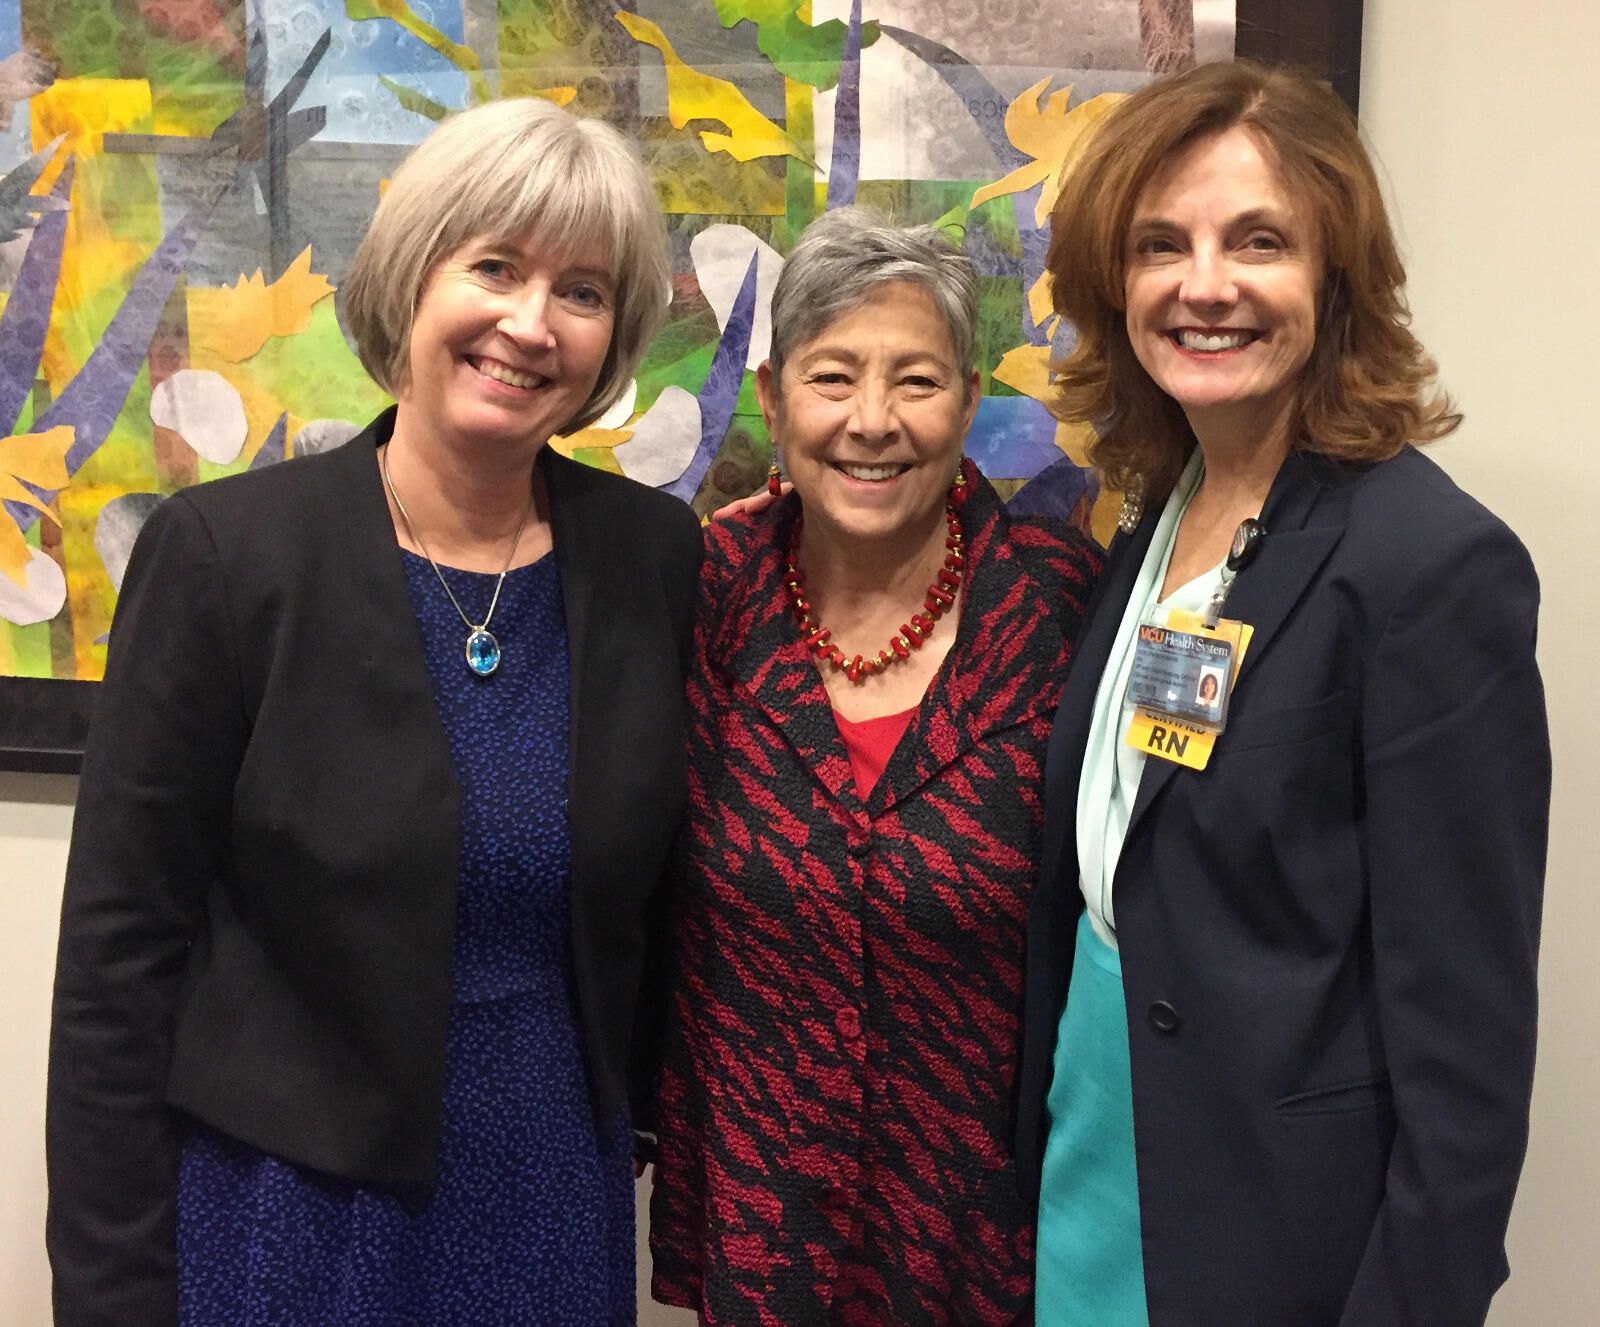 Marianne Baernholdt, Ph.D.,director of the Langston Center for Quality, Safety and Innovation; Nancy Langston, Ph.D., retired School of Nursing dean; and Deb Zimmerman, DNP chief nursing officer and vice president of patient care services for VCU Health System.